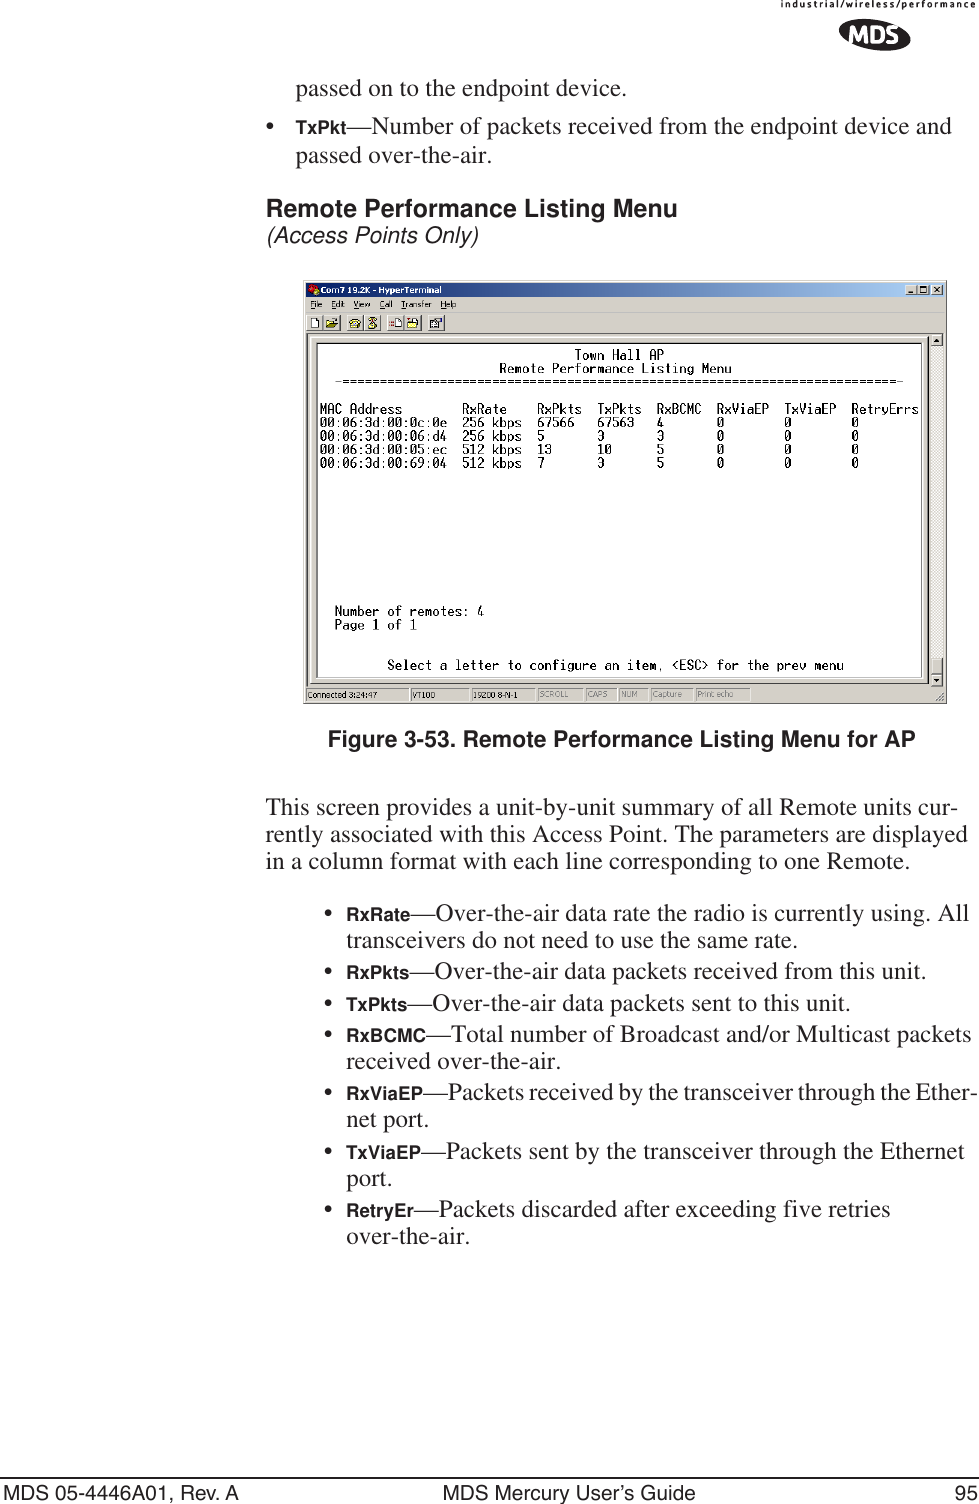 MDS 05-4446A01, Rev. A MDS Mercury User’s Guide 95passed on to the endpoint device.•TxPkt—Number of packets received from the endpoint device and passed over-the-air.Remote Performance Listing Menu (Access Points Only) Figure 3-53. Remote Performance Listing Menu for APThis screen provides a unit-by-unit summary of all Remote units cur-rently associated with this Access Point. The parameters are displayed in a column format with each line corresponding to one Remote.•RxRate—Over-the-air data rate the radio is currently using. All transceivers do not need to use the same rate.•RxPkts—Over-the-air data packets received from this unit.•TxPkts—Over-the-air data packets sent to this unit.•RxBCMC—Total number of Broadcast and/or Multicast packets received over-the-air.•RxViaEP—Packets received by the transceiver through the Ether-net port.•TxViaEP—Packets sent by the transceiver through the Ethernet port.•RetryEr—Packets discarded after exceeding five retries over-the-air.